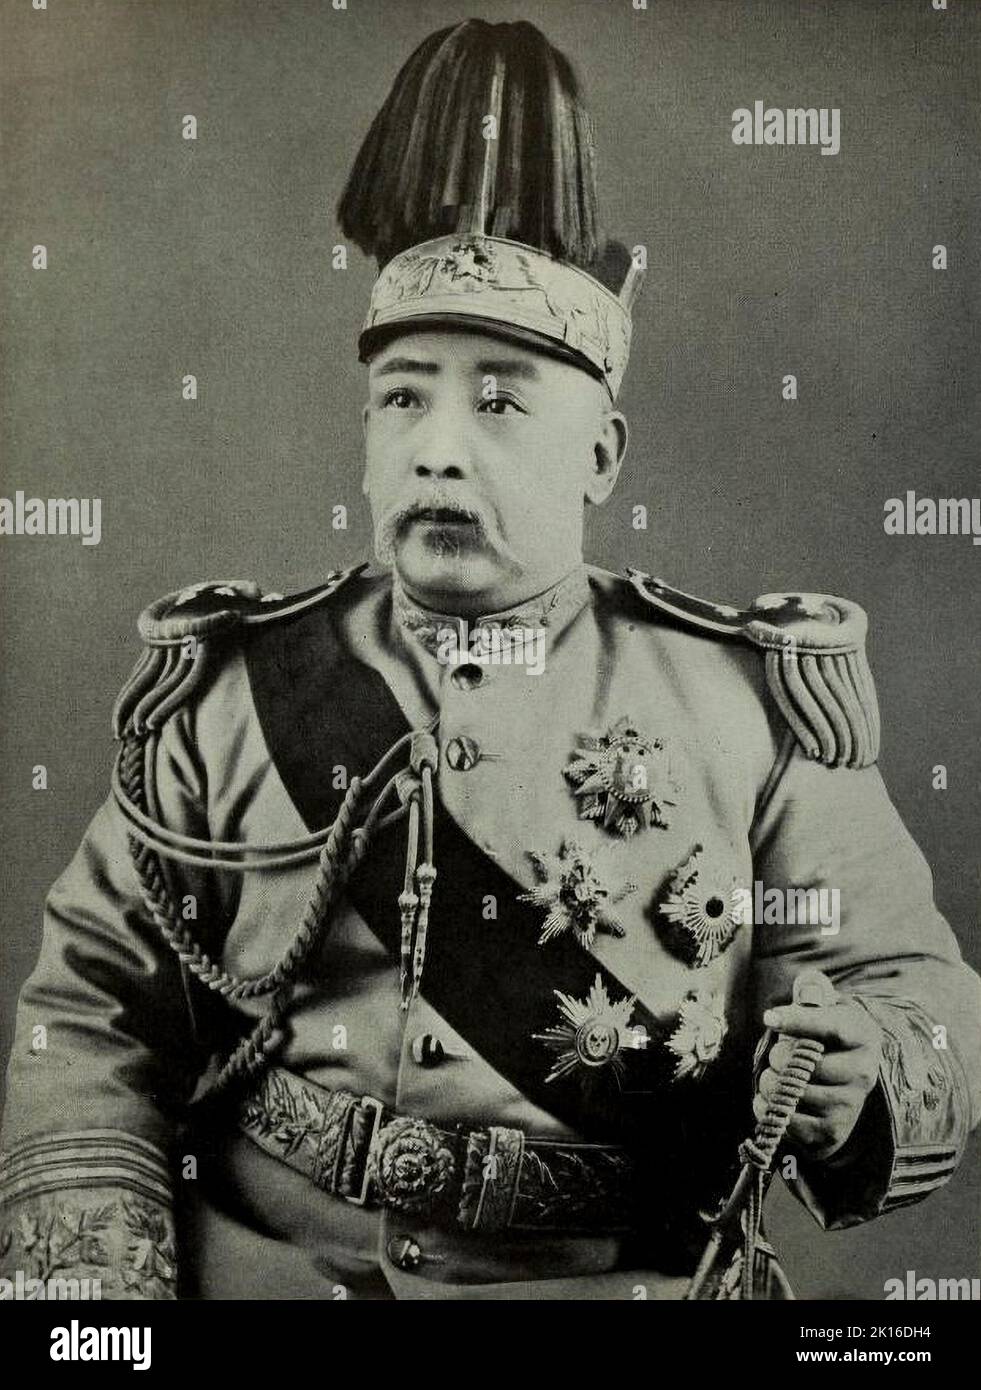 Portrait of Yuan Shikai (1859 -1916), Chinese military and government official during late Qing dynasty, later became the First President of Republic of China. Stock Photo